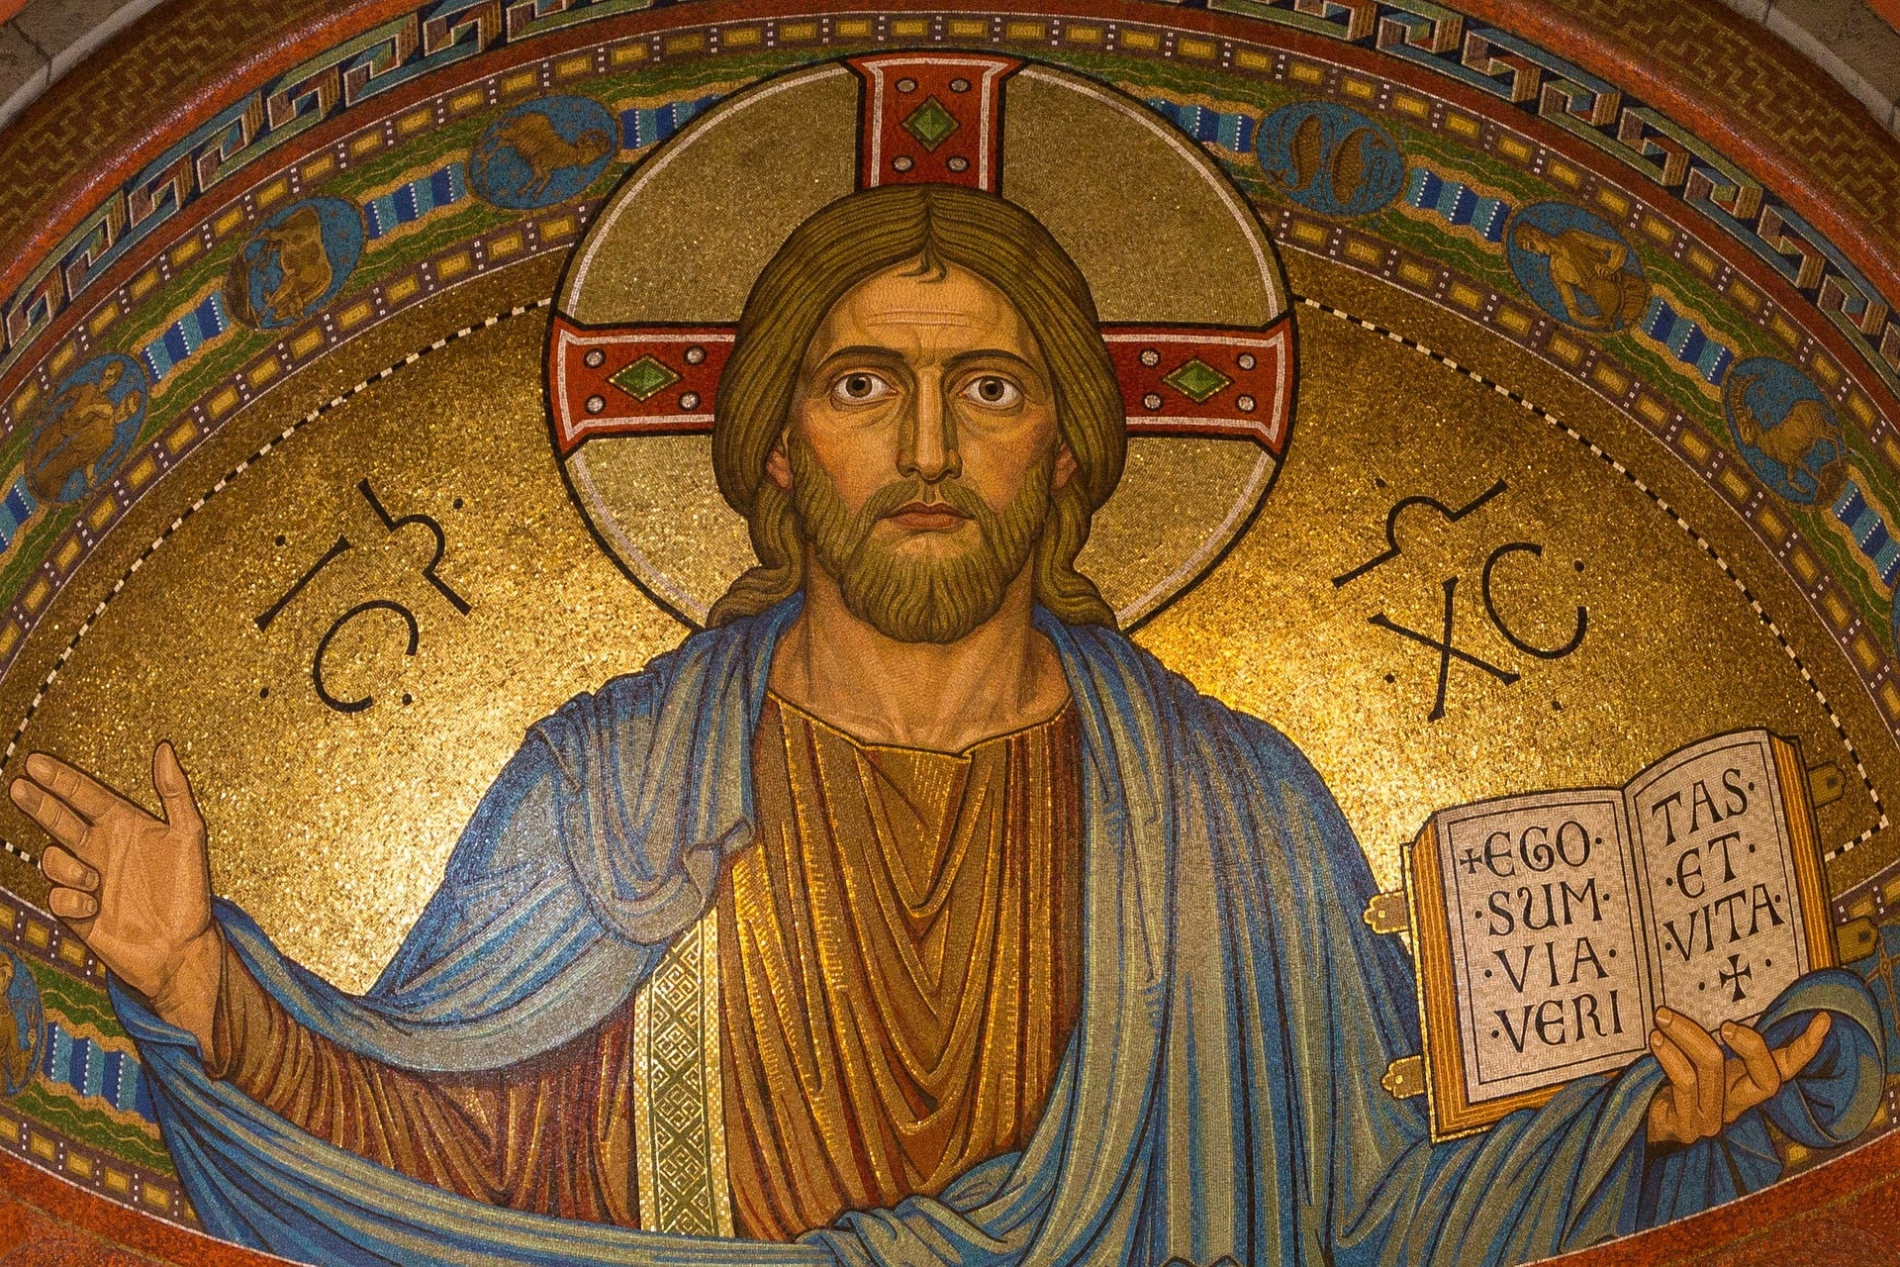 January 2023 | The Case for Christ: What’s the Evidence for the Resurrection?